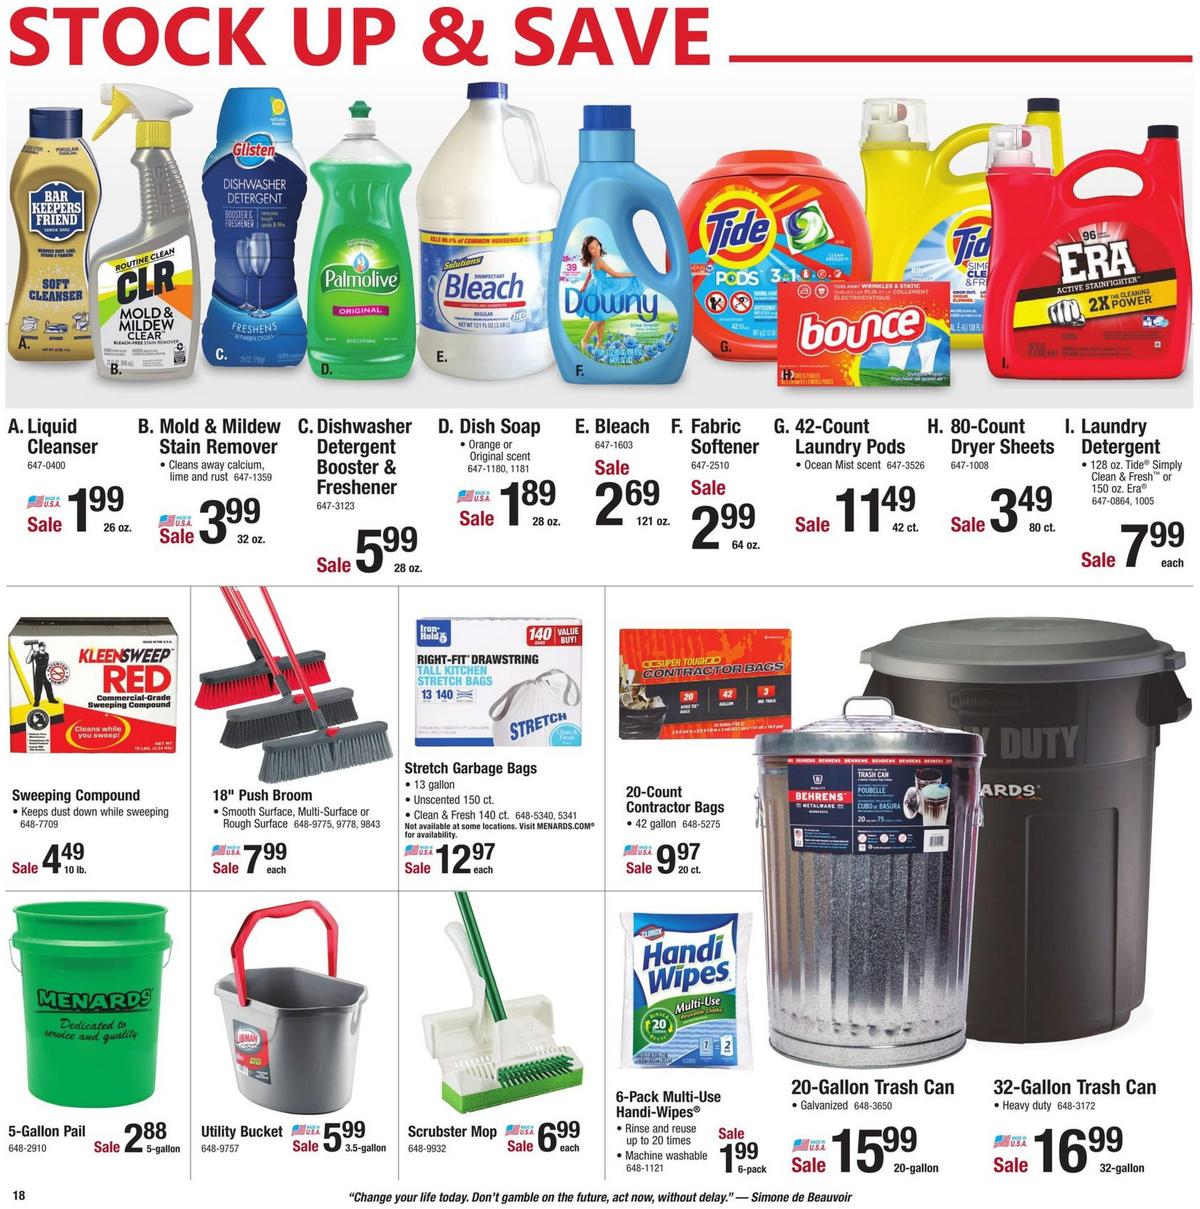 Menards Your Home Improvement Store Weekly Ads & Special Buys for ...